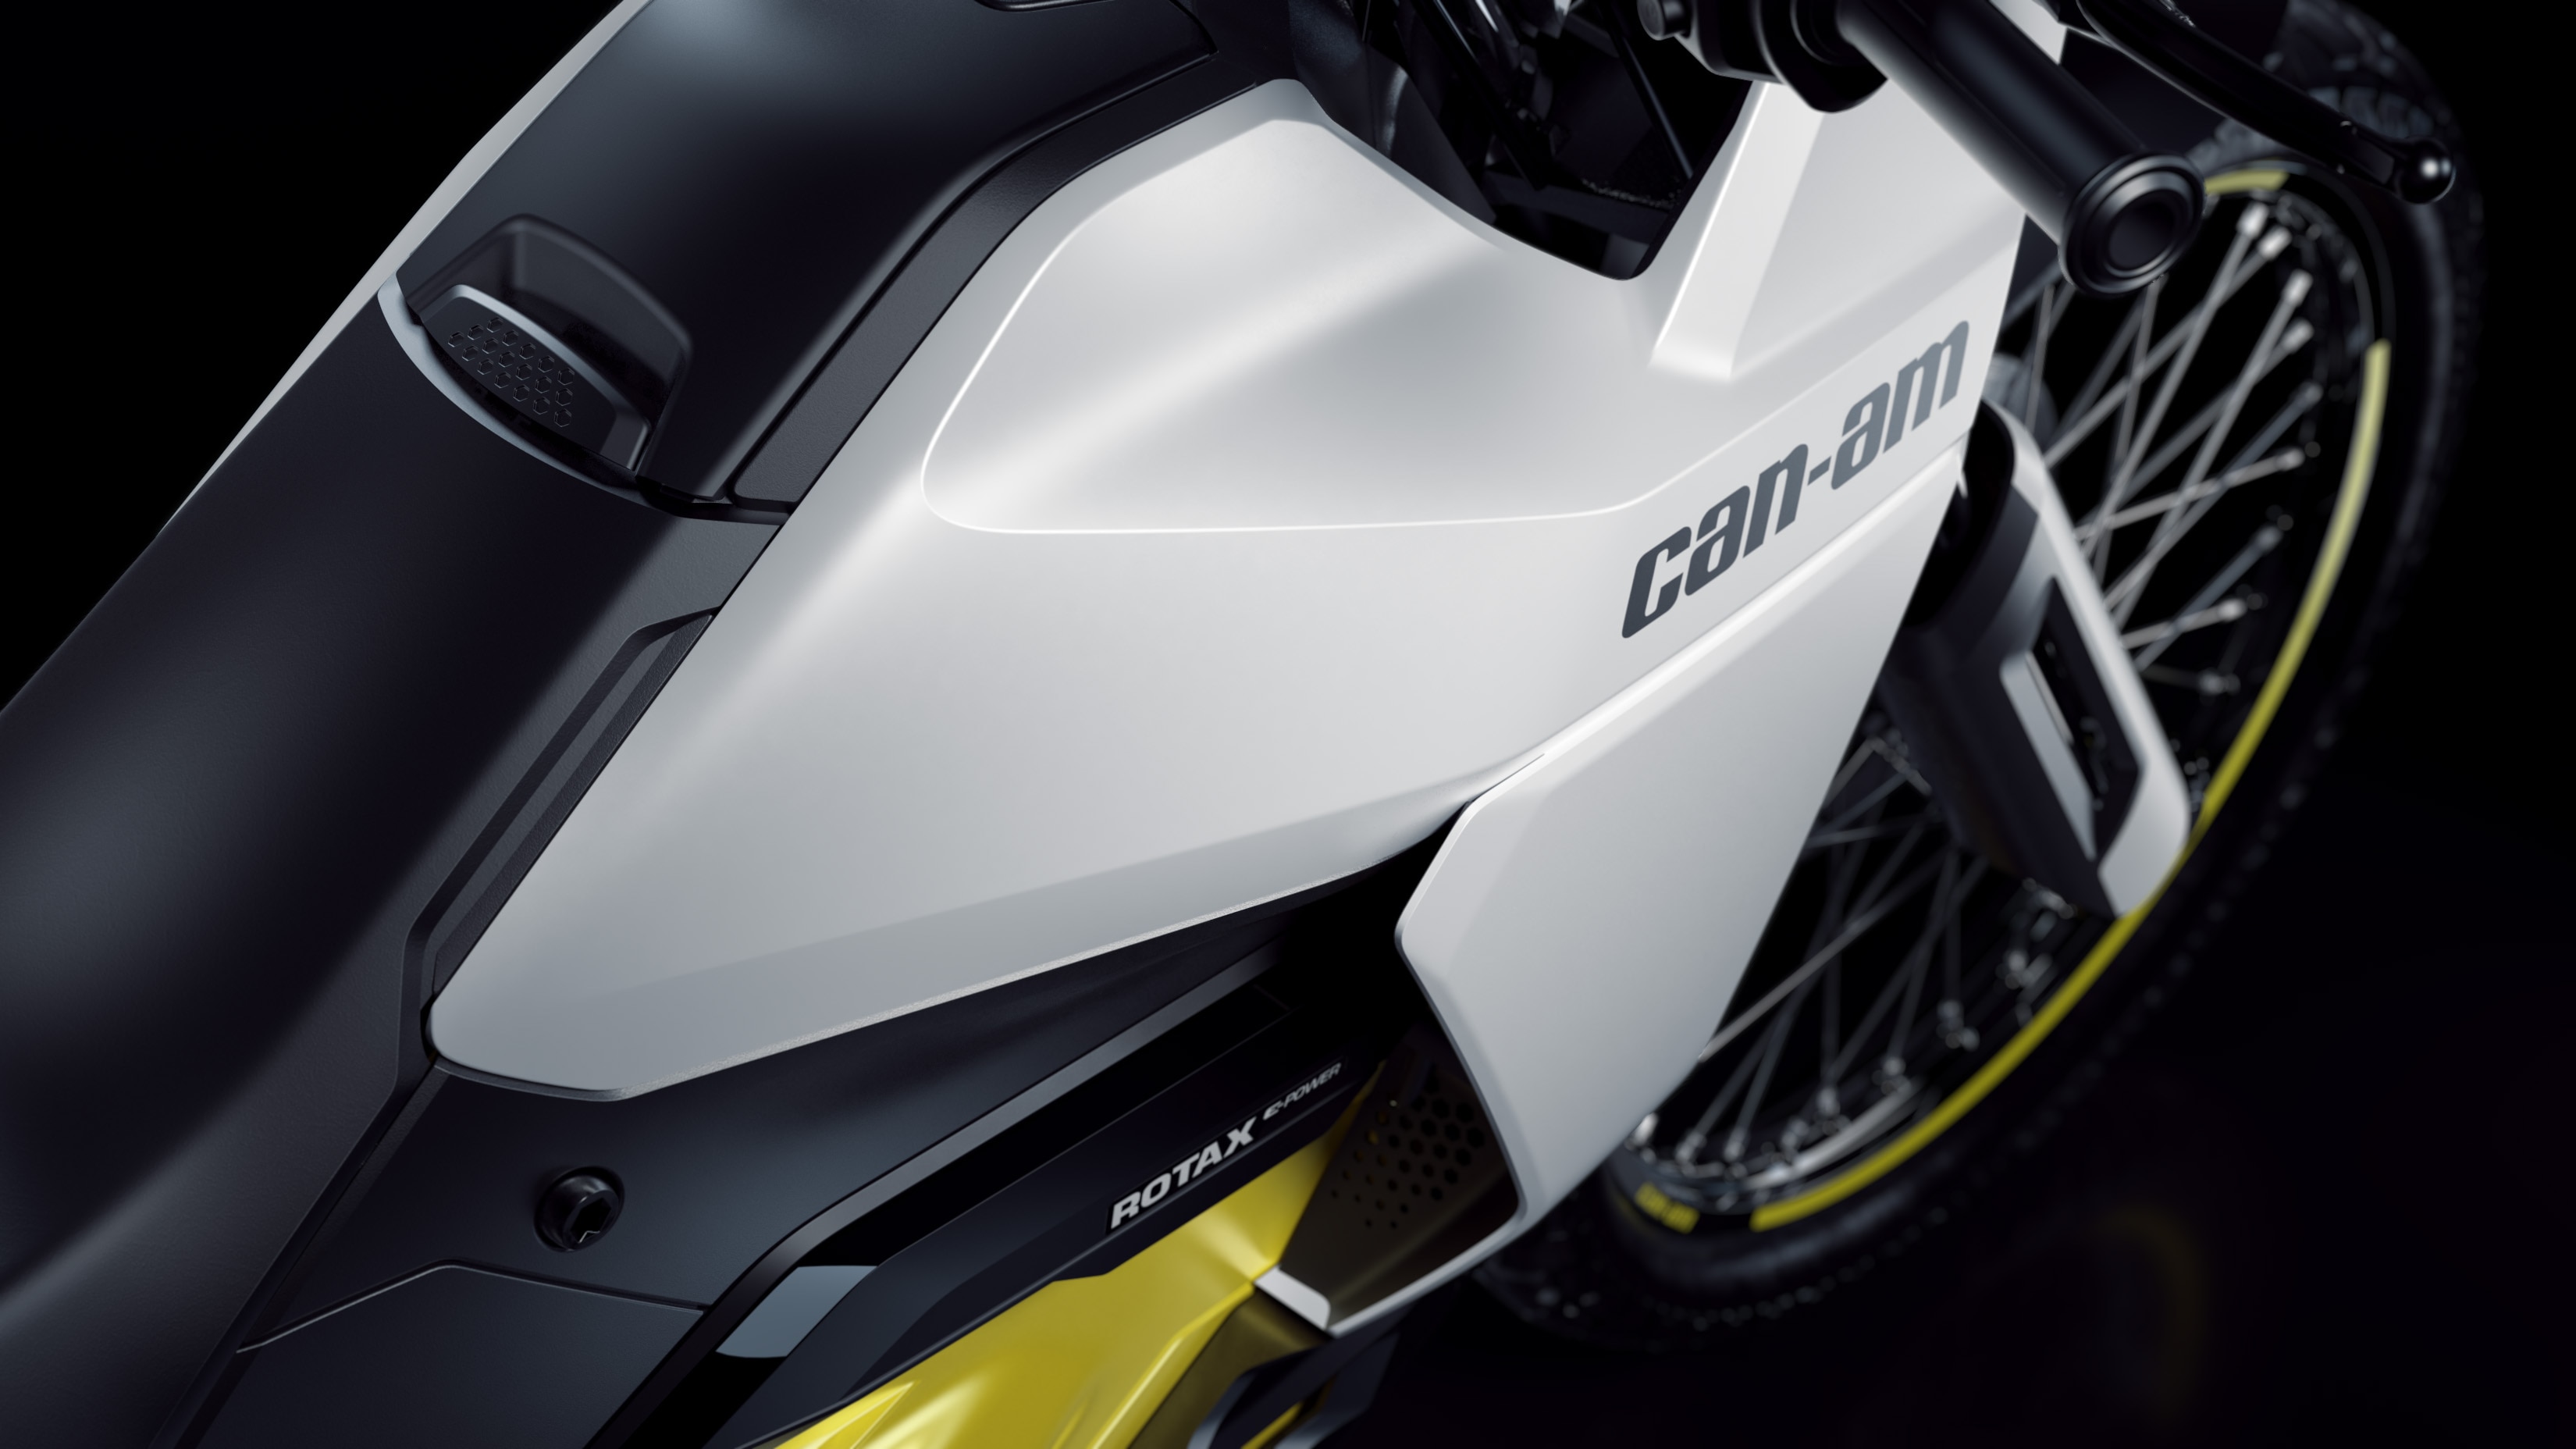 Zoom on the Hood of the Can-Am Origin motorcycle